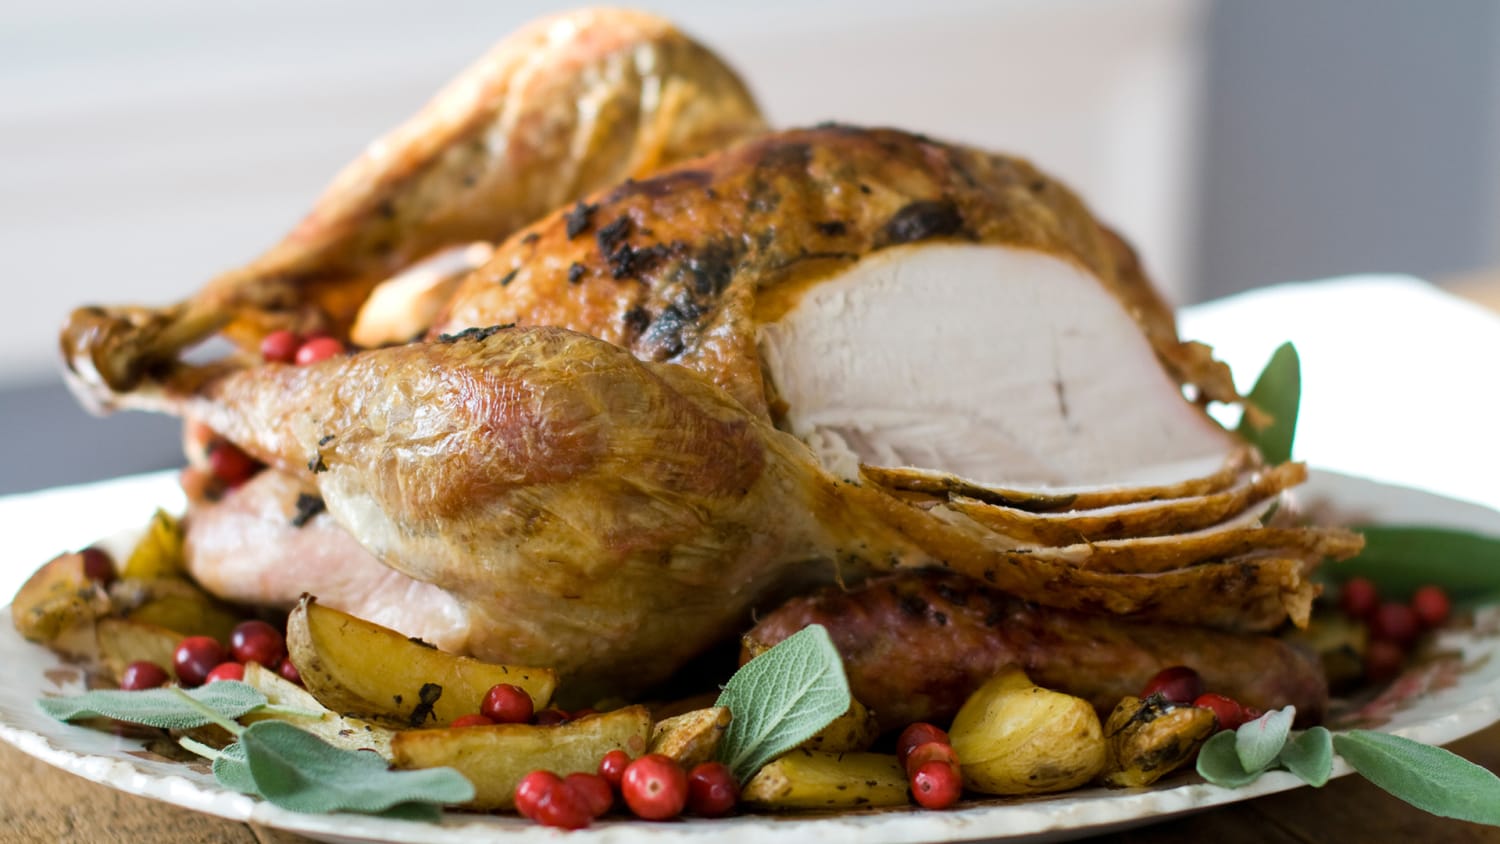 Where To Buy Pre Made Turkeys For Thanksgiving